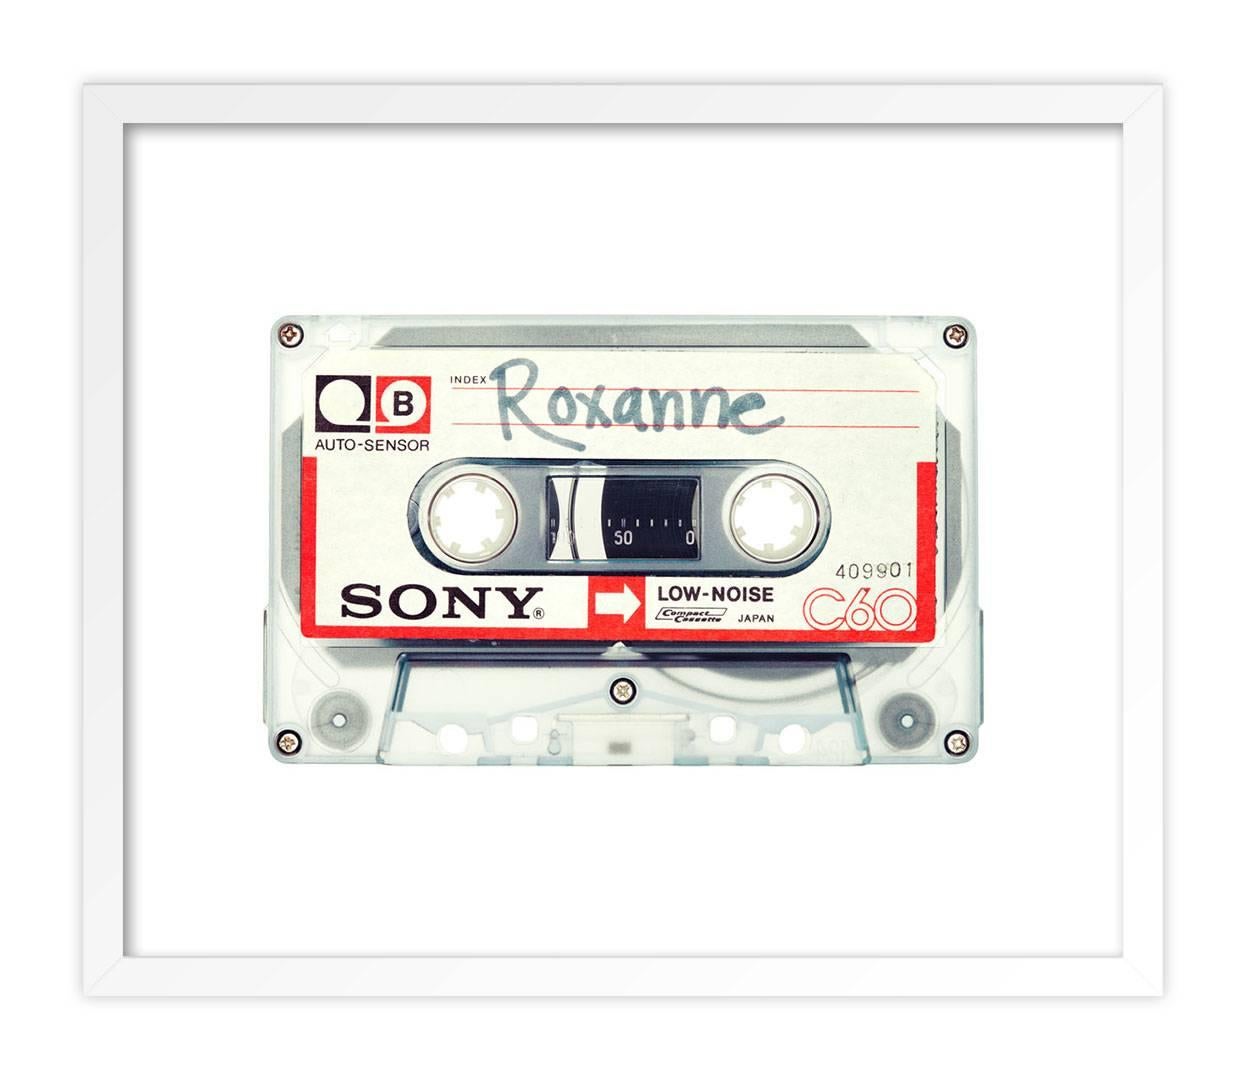 ABOUT THIS PIECE: Let's not pretend that we don't enjoy 80's music.

ABOUT THIS ARTIST: Floyd P. Stanley is an LA based photographer creating product shot photographs of mixed tapes. Stanley and a few of his friends created the different labels for